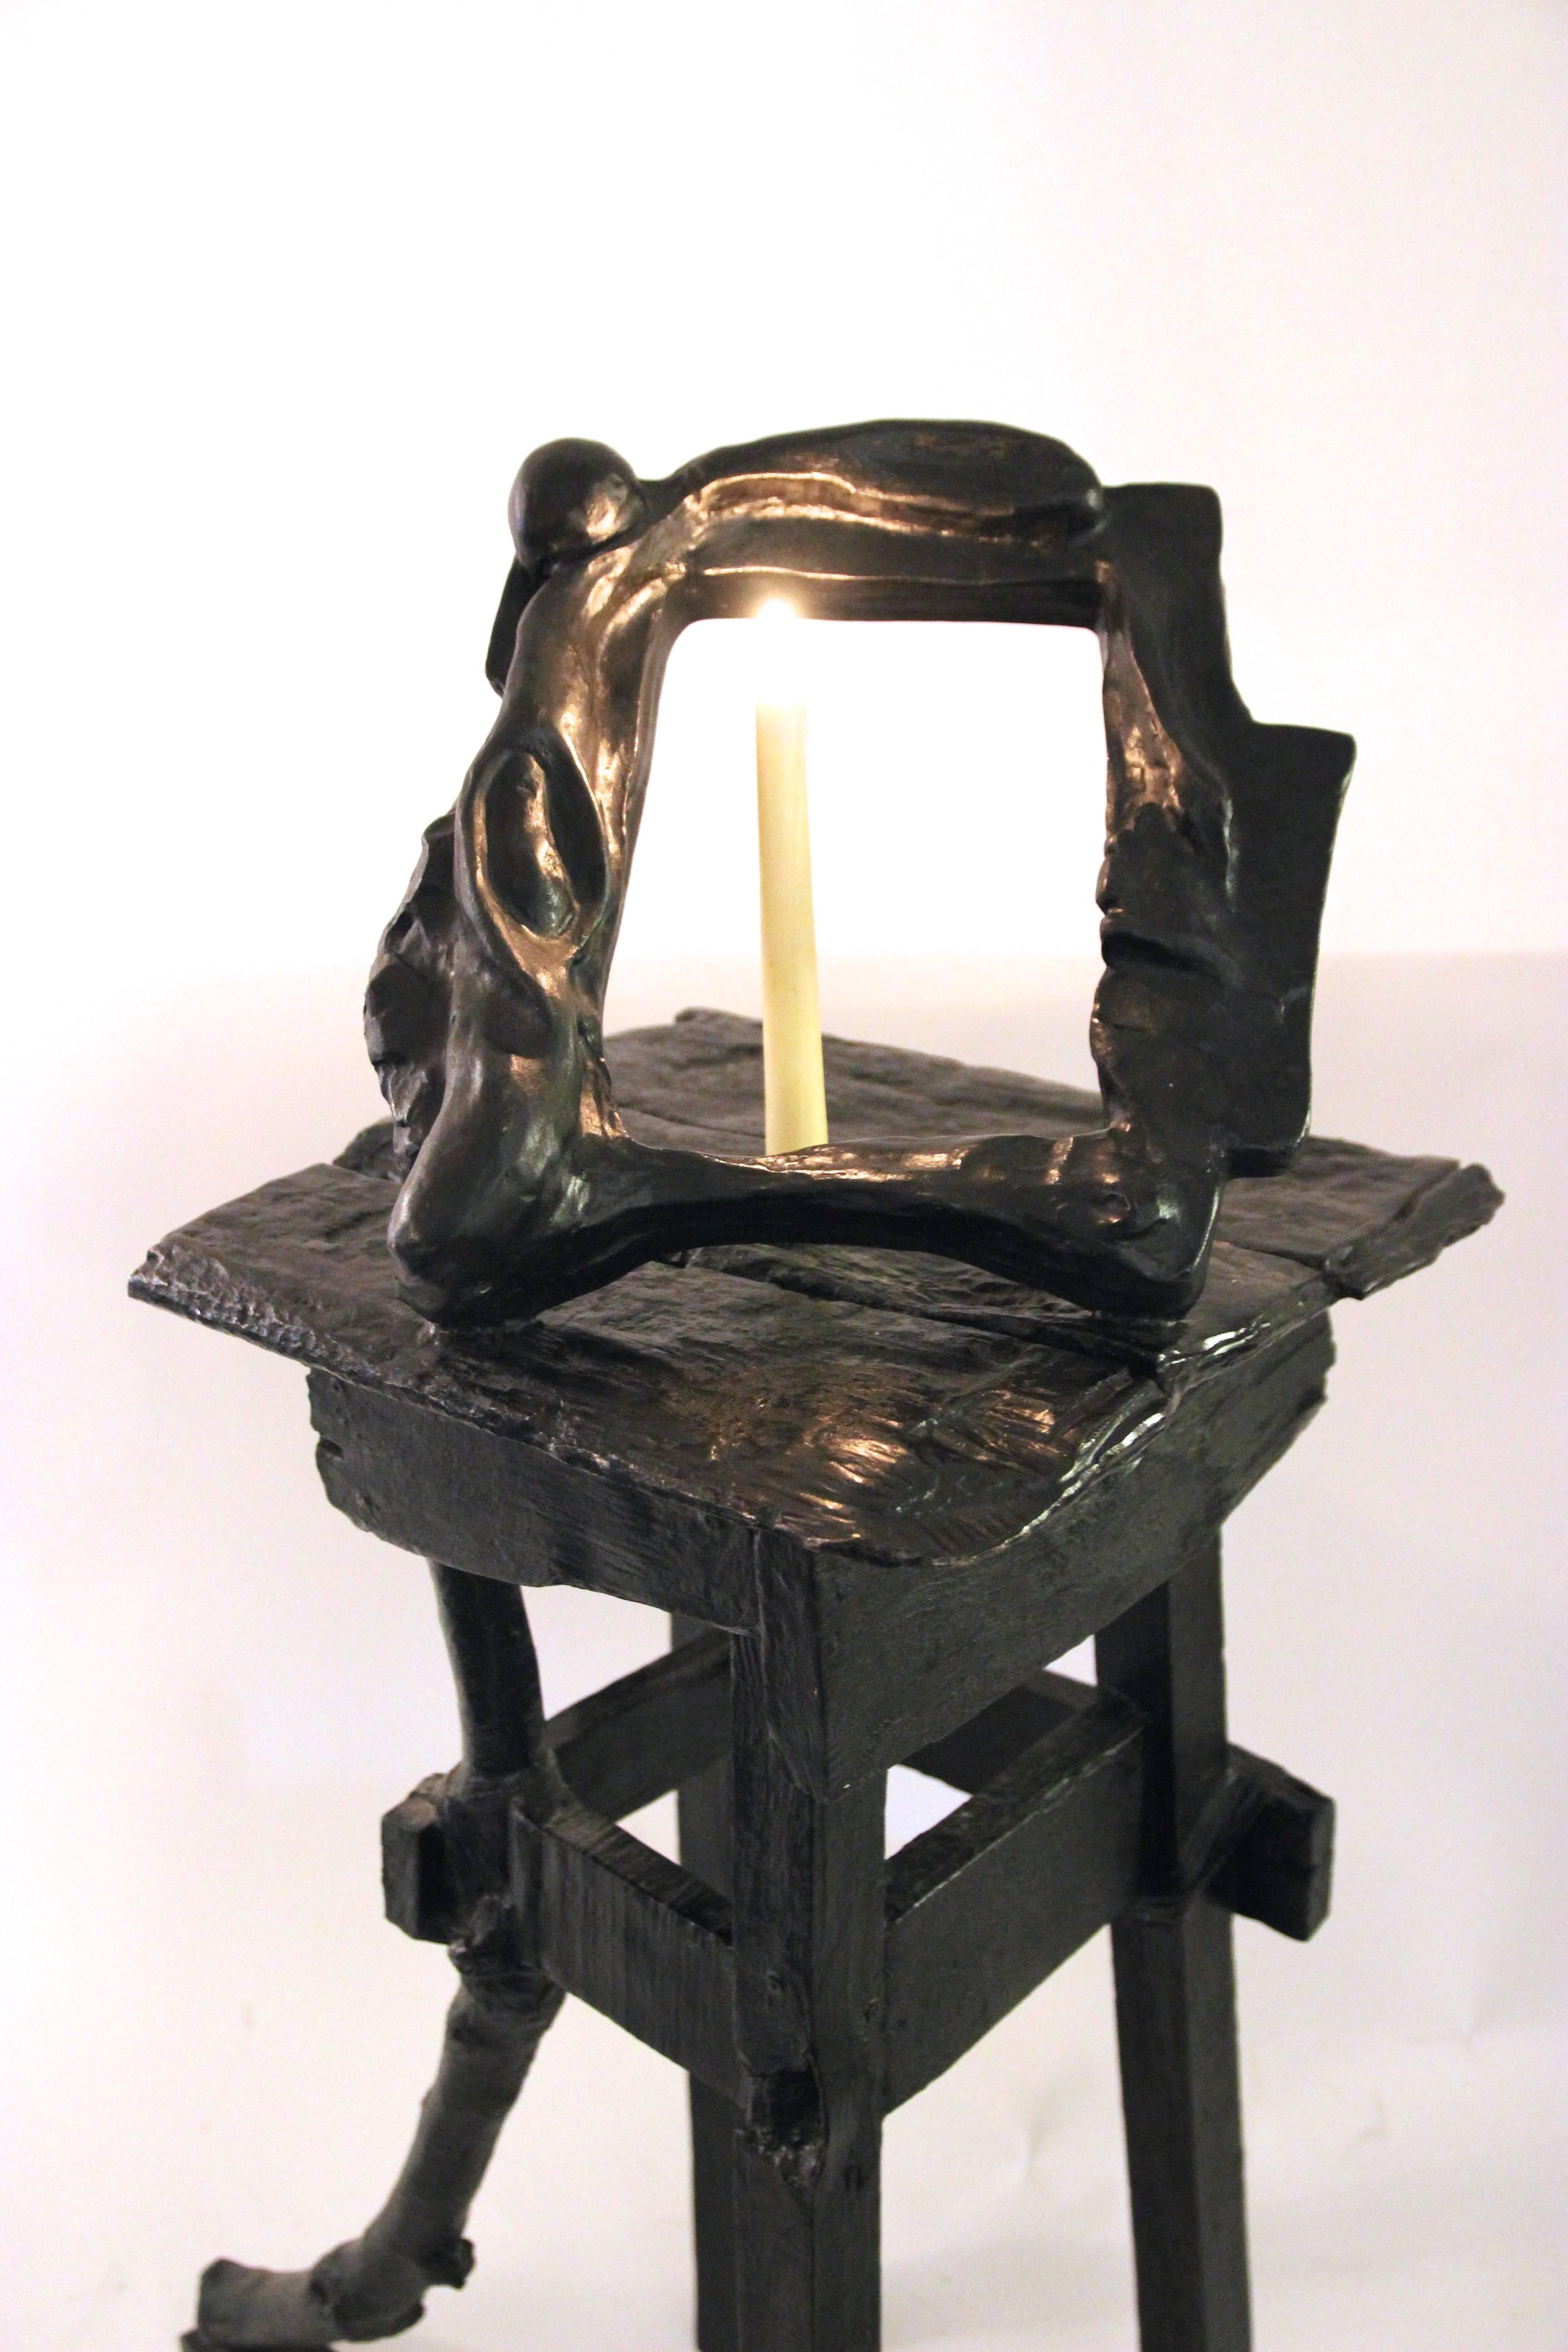 Sandro Chia, Short Stories 2004, Bronze, Edition 7/9, Signed and Dated In Good Condition In Nice, Cote d' Azur